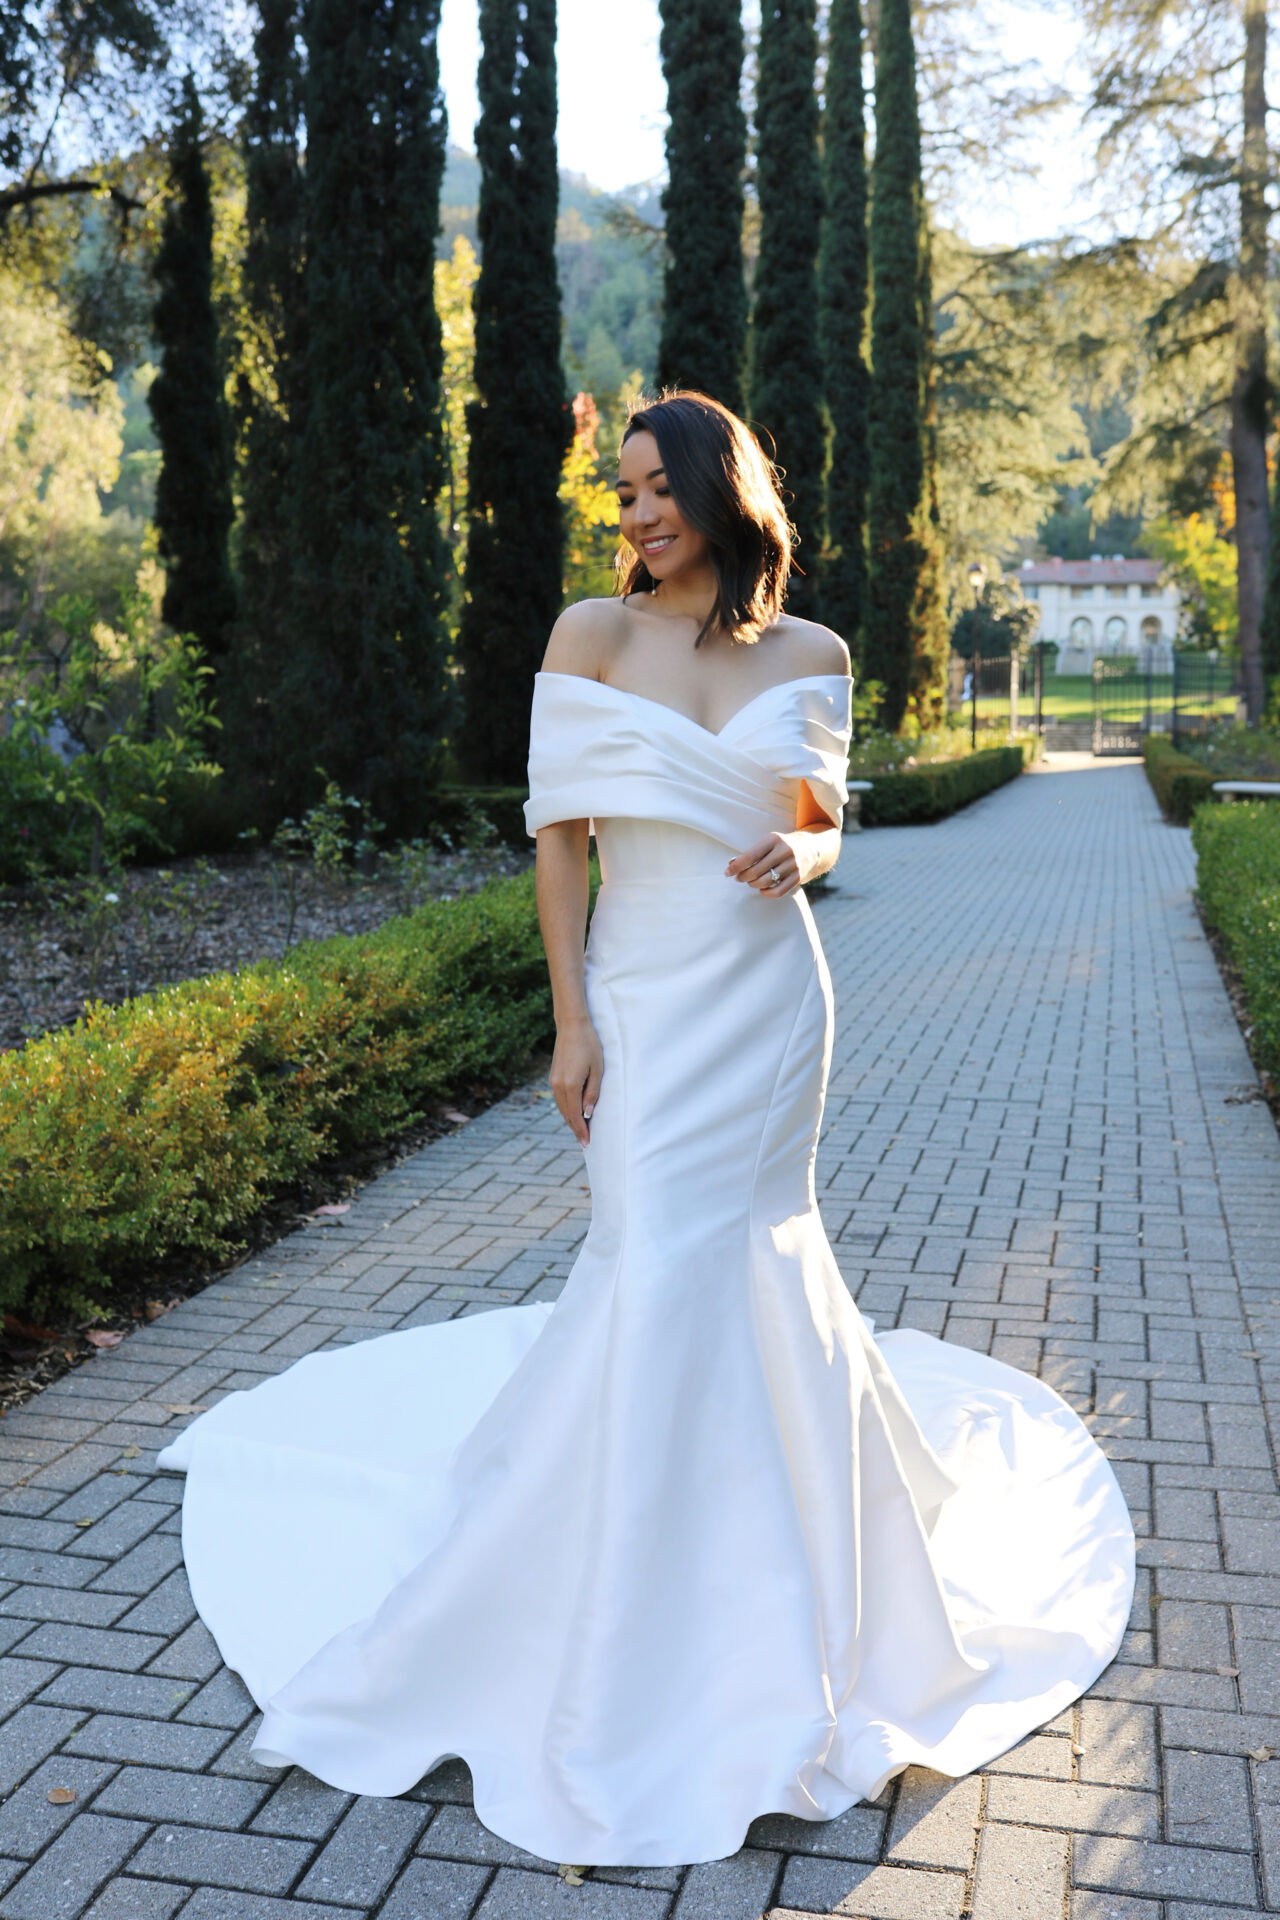 Essense of Australia D3754 off the shoulder mermaid wedding dress in plain fabric with stunning statement collar full length front view.